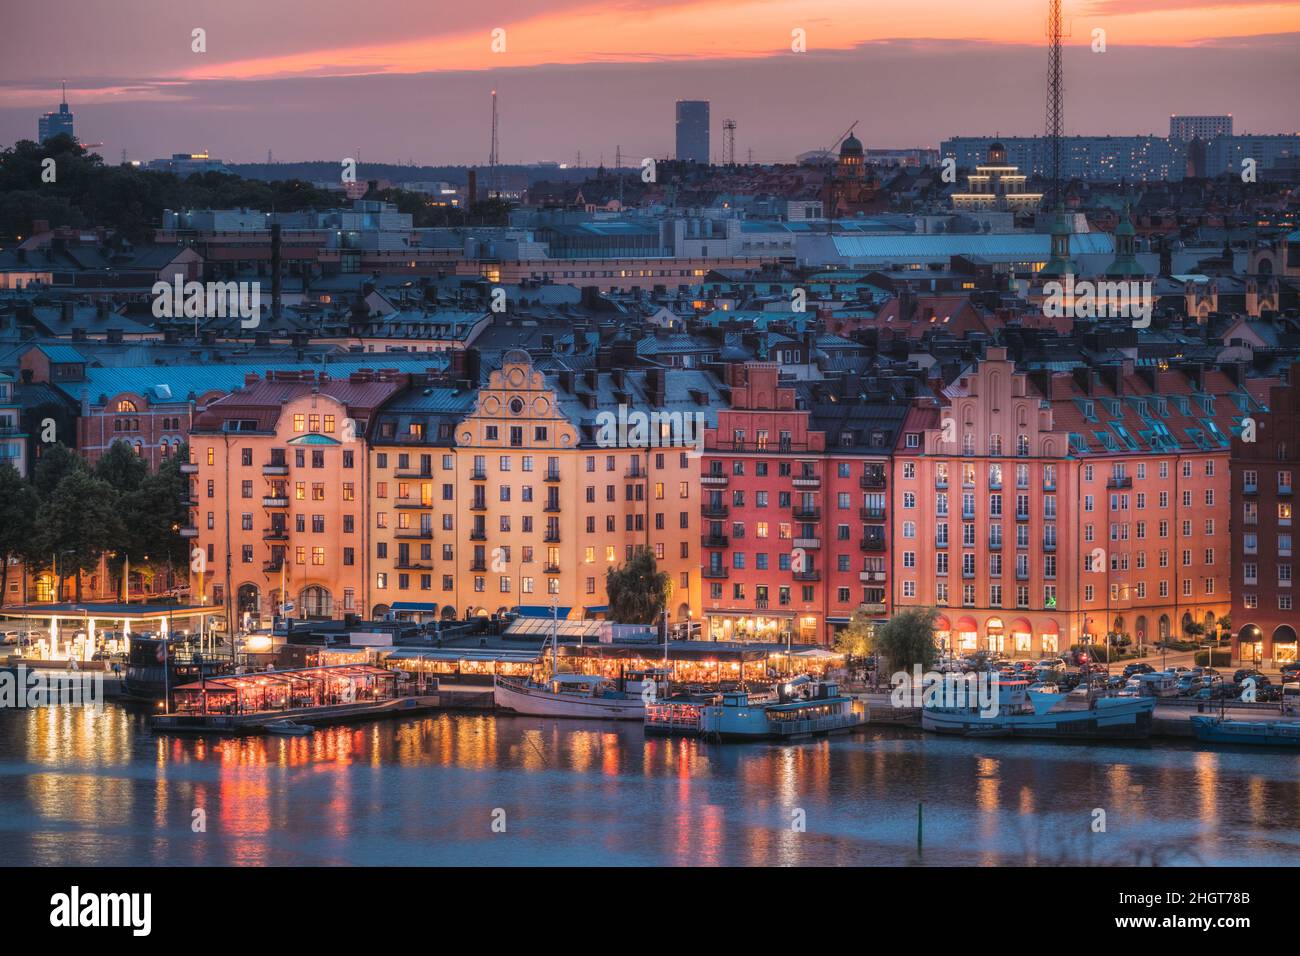 Stockholm, Sweden. Skyline View Of Residential Area Houses In Norr  Malarstrand Street, Kungsholmen Island. Scenic View In Sunset Twilight Dusk  Lights Stock Photo - Alamy